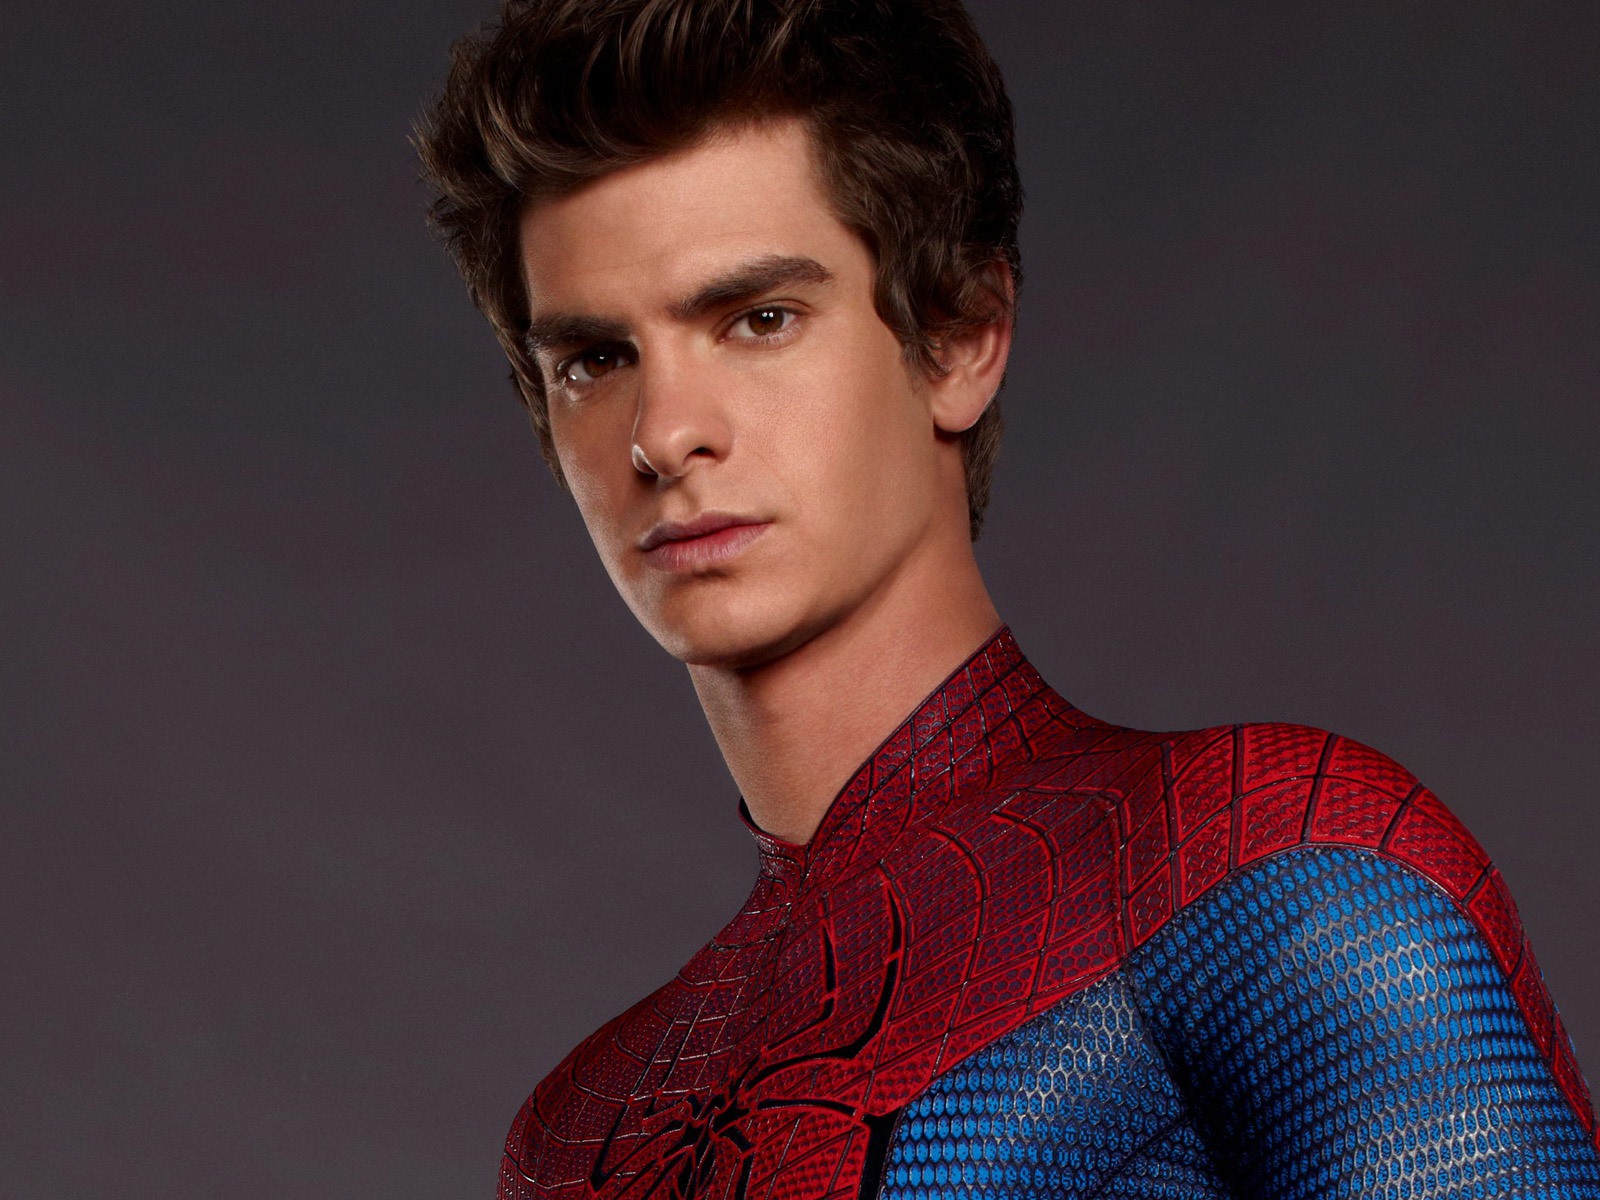 The Amazing Spider-Man 2012 wallpapers #2 - 1600x1200